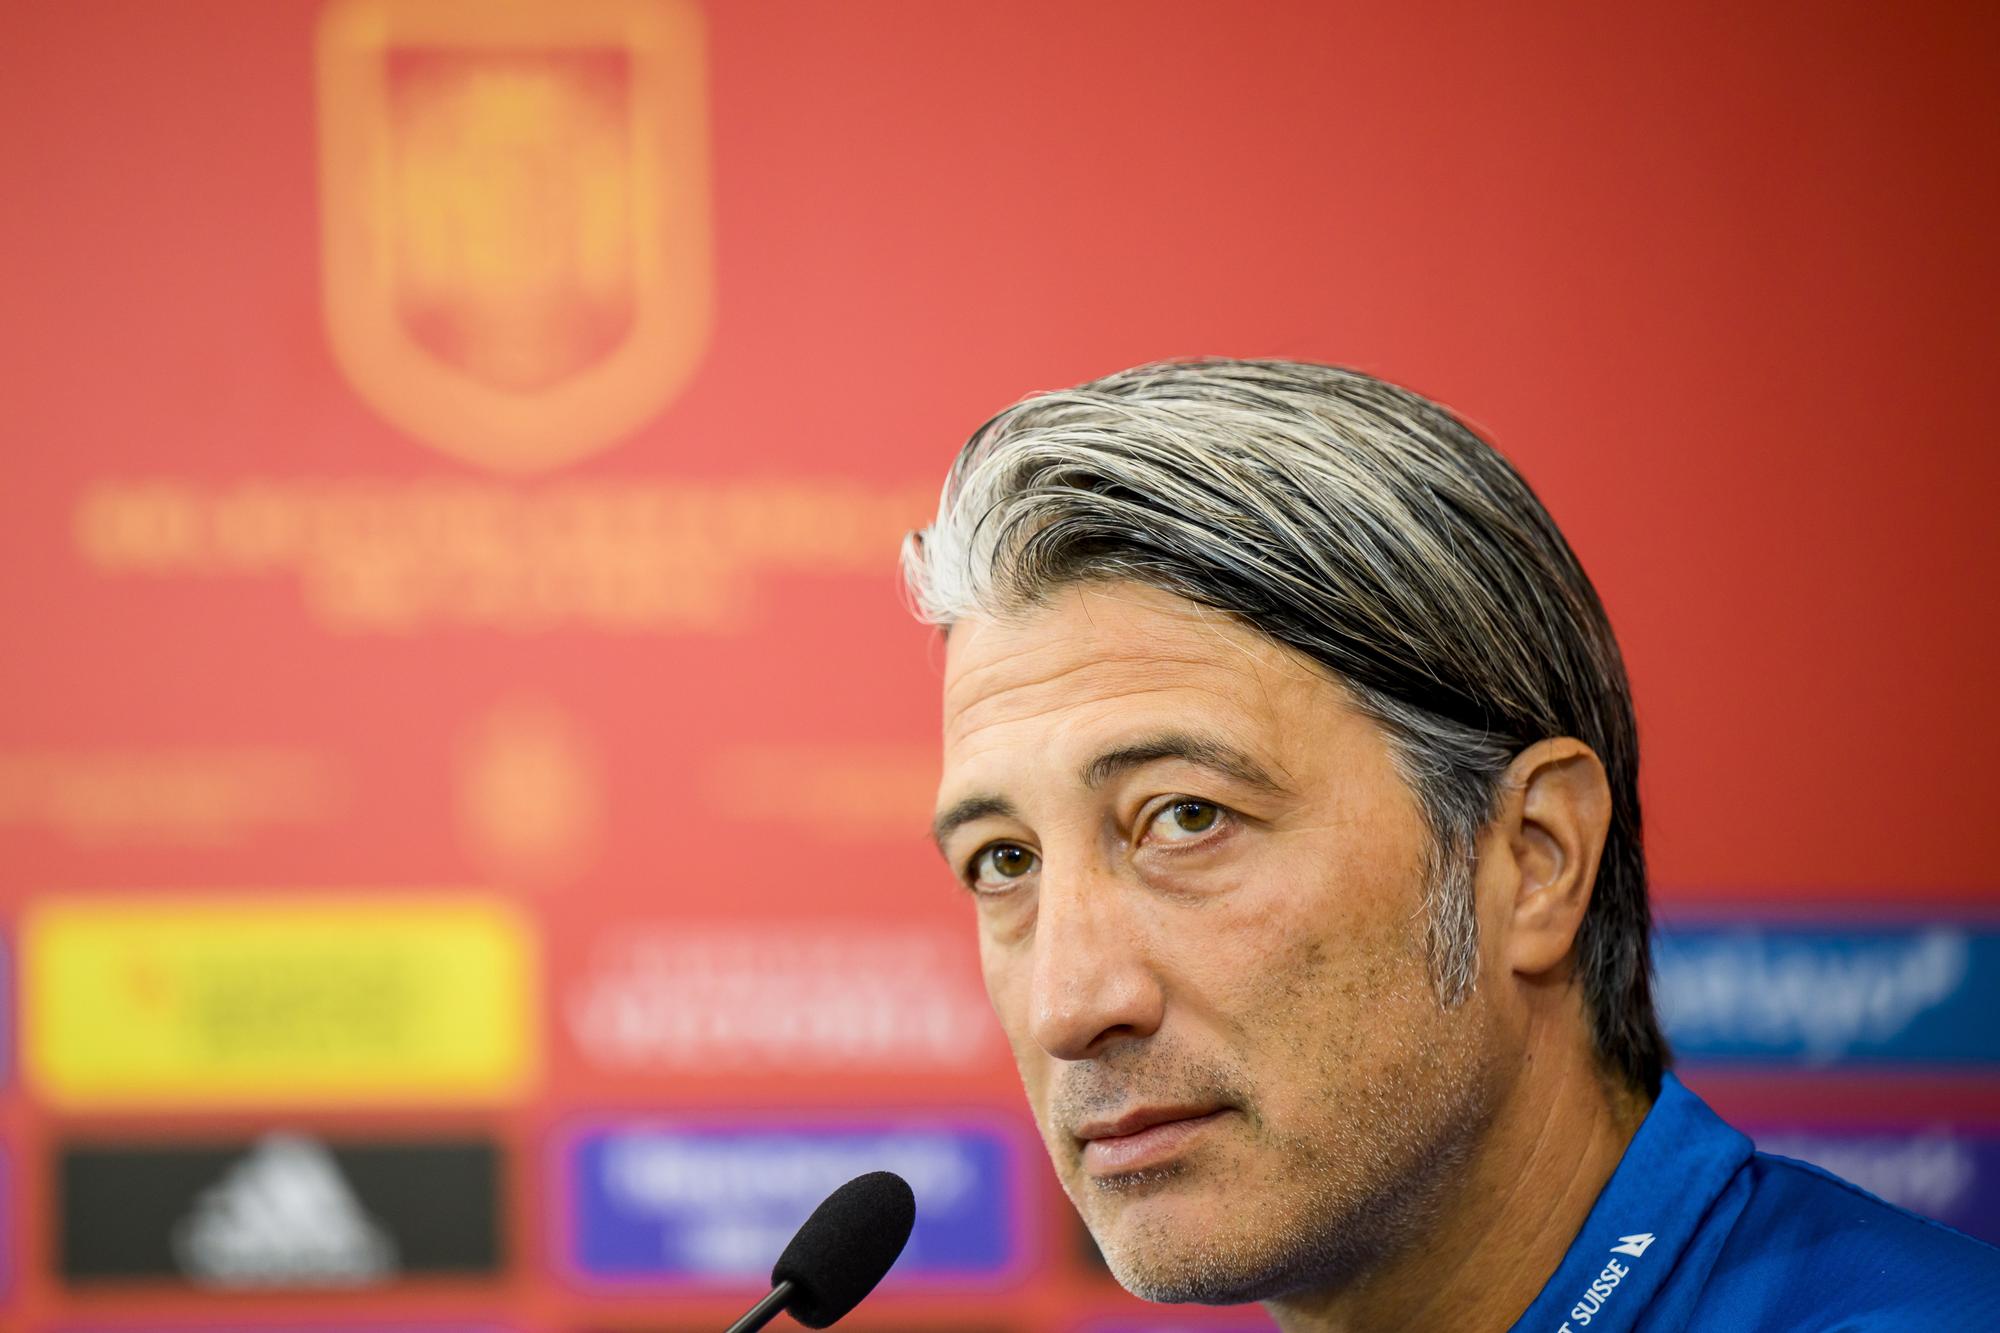 Switzerland's head coach Murat Yakin attends a press conference ahead of the UEFA Nations League match